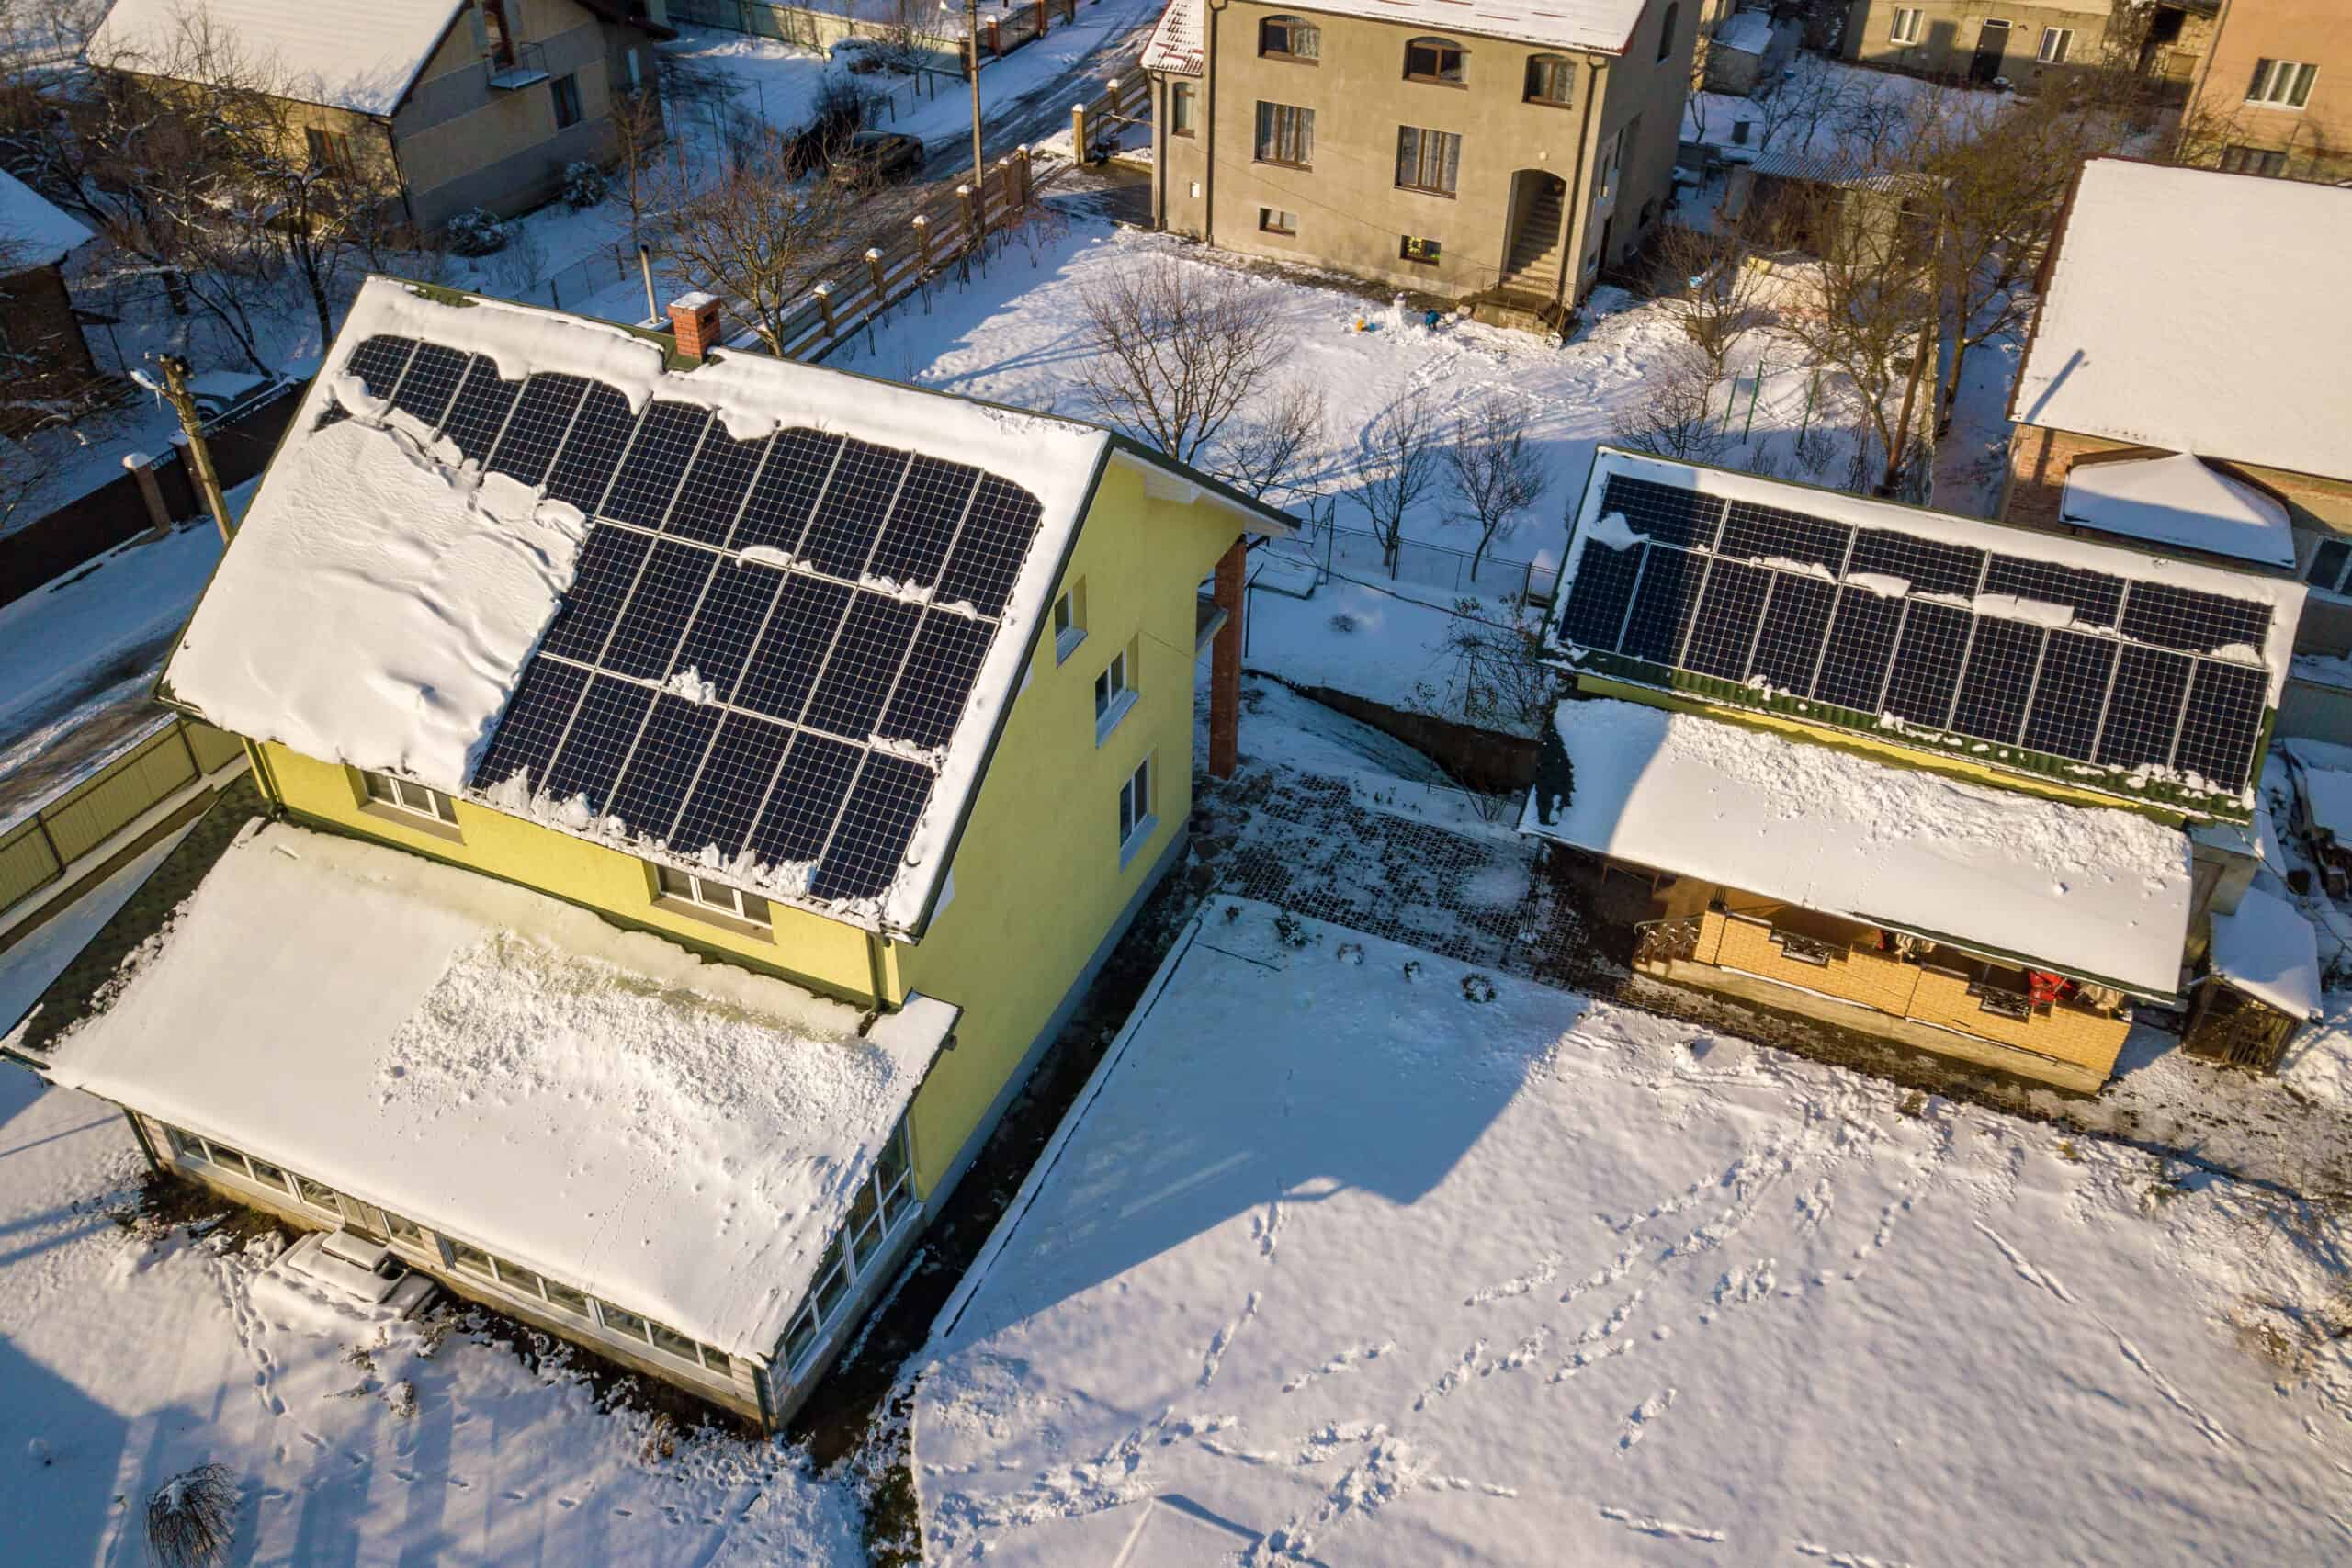 Snow melting off of solar panels on a roof.